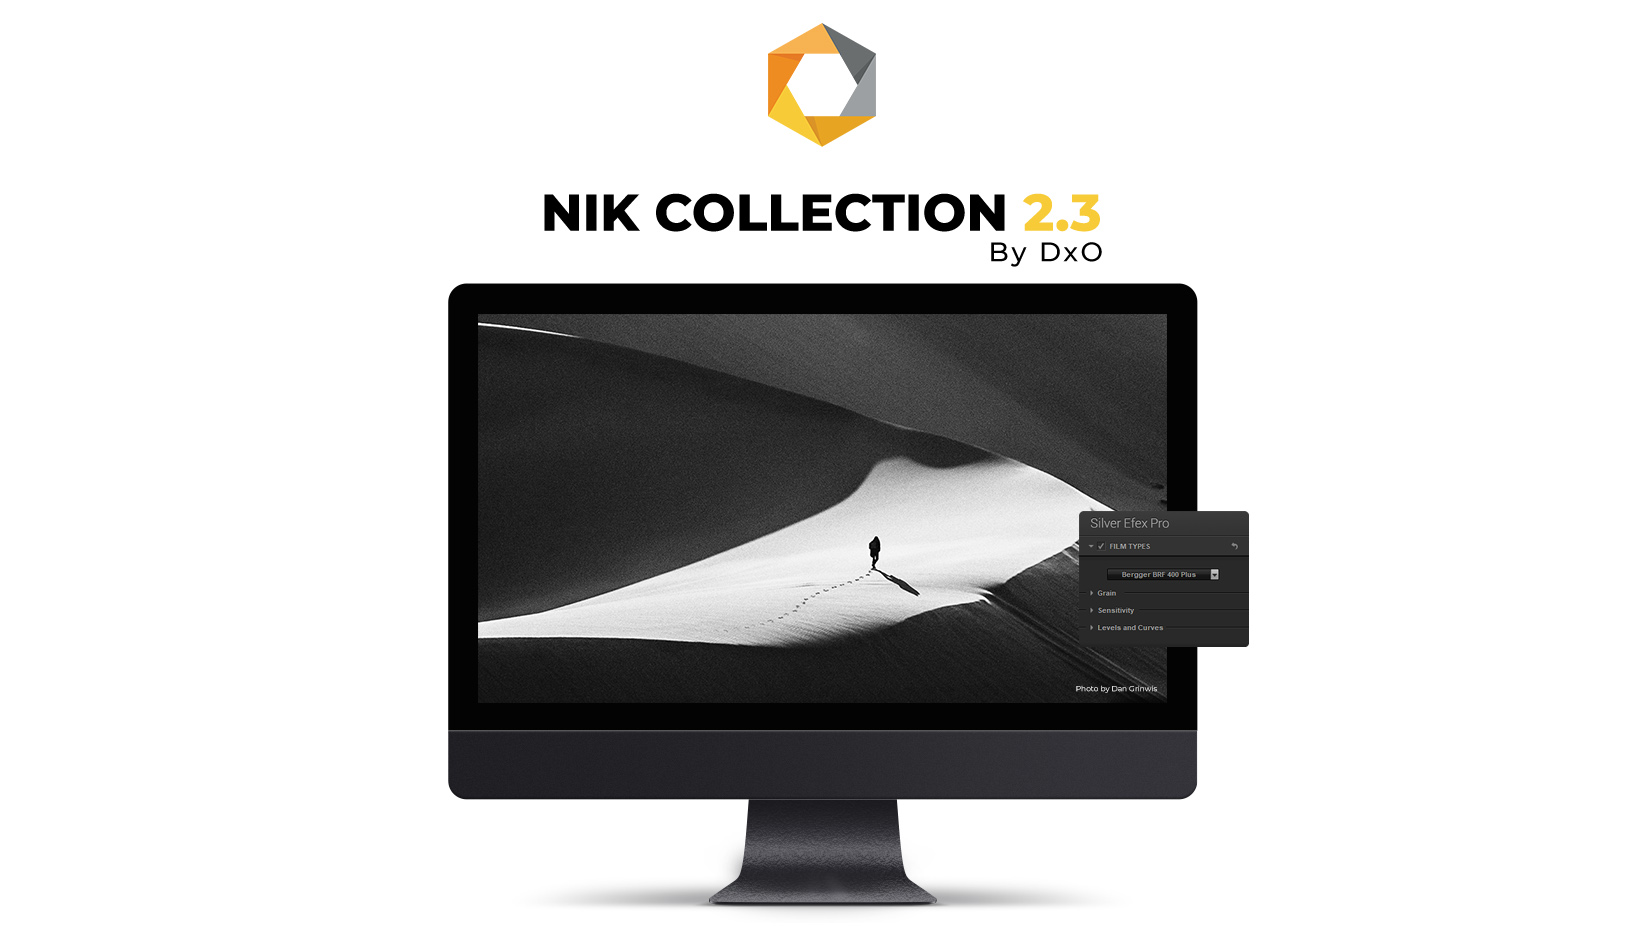 Nik Collection by DxO 6.2.0 instal the new